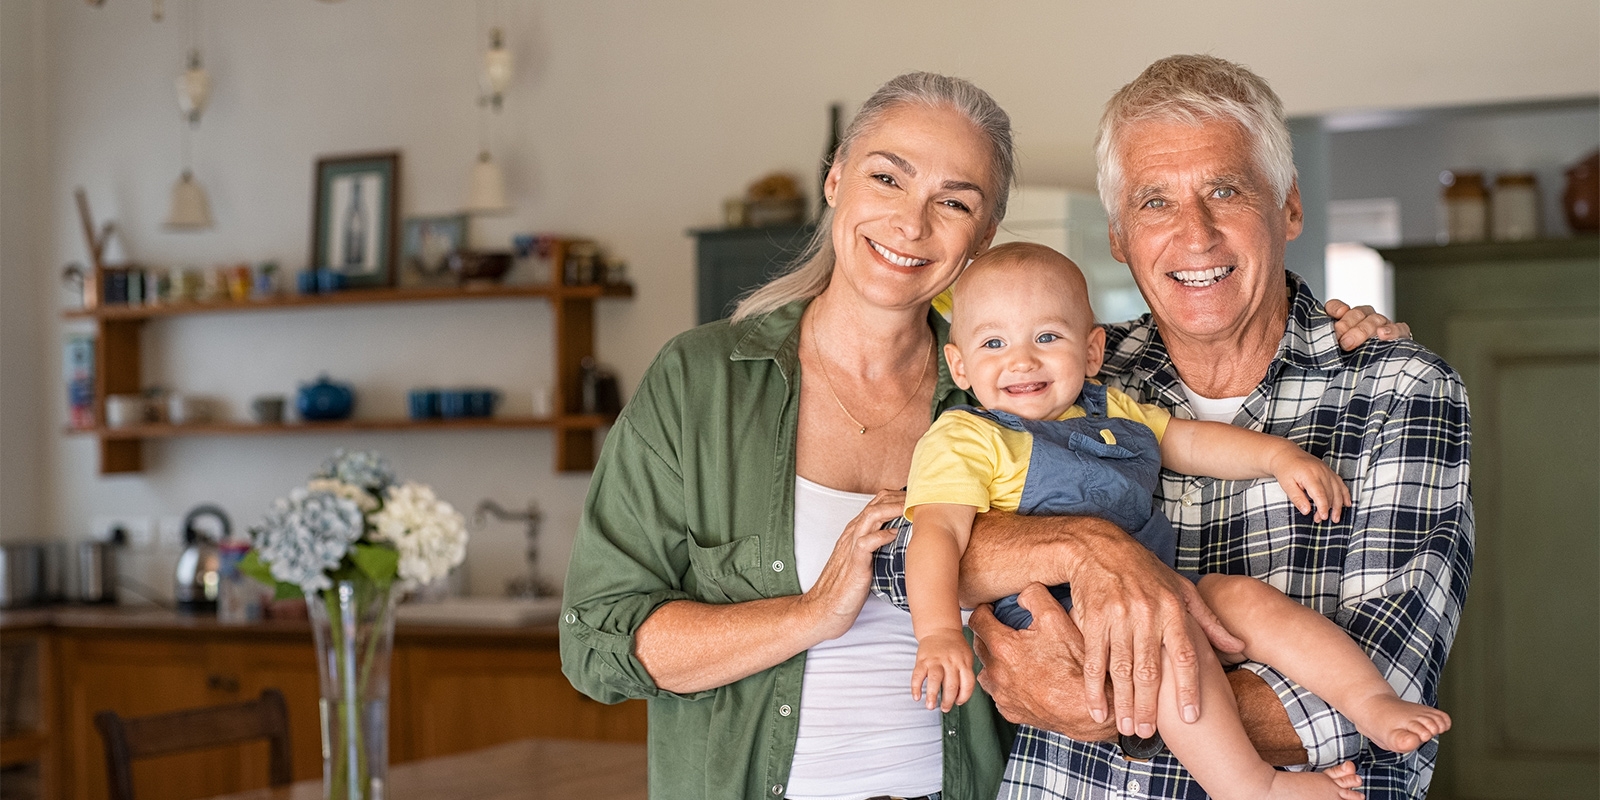 elderly couple smiling and holding a baby